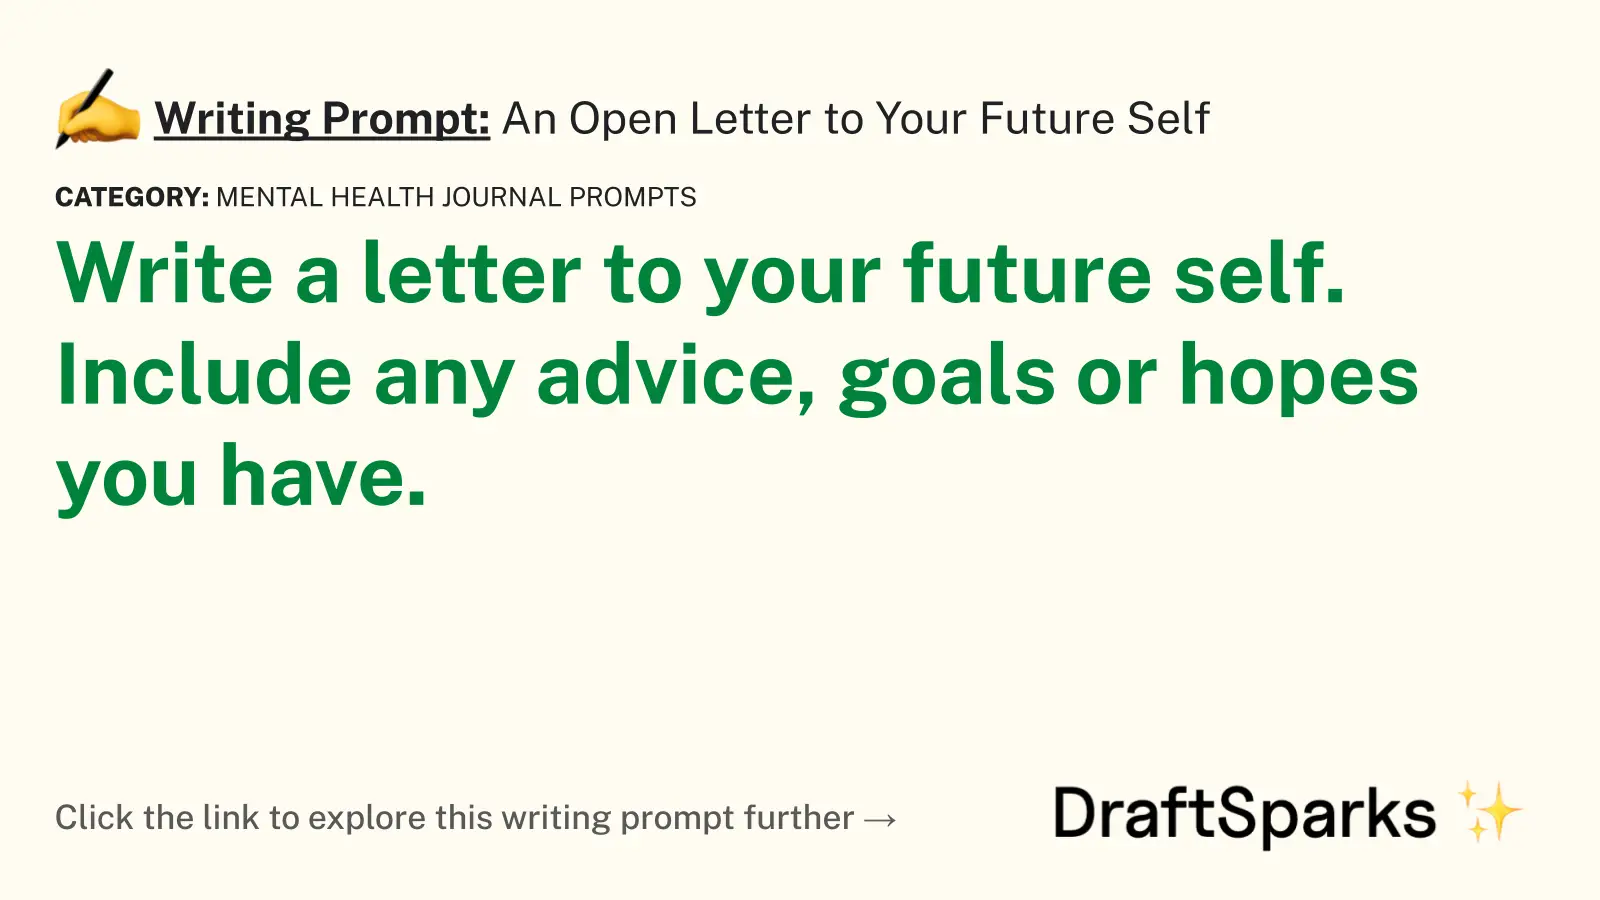 An Open Letter to Your Future Self